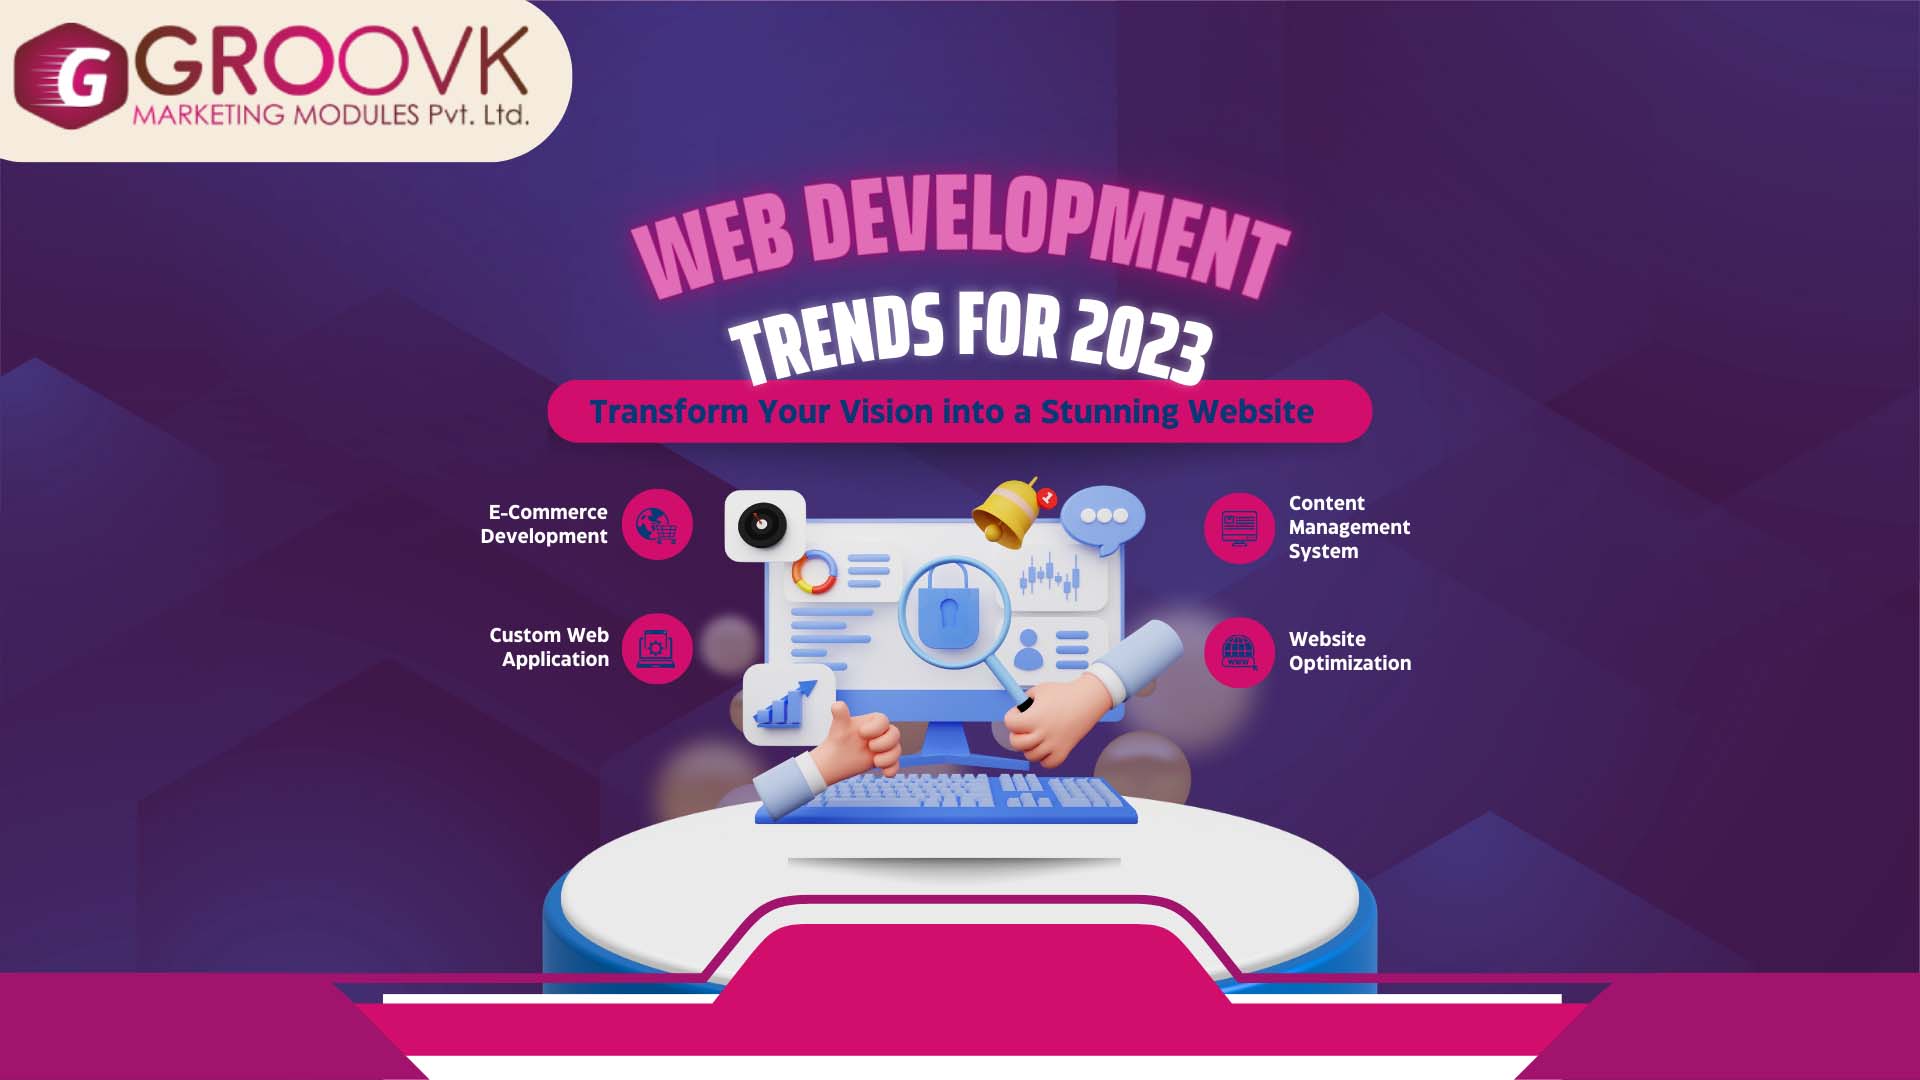 Top Web Development Trends to Look Out for in 2023